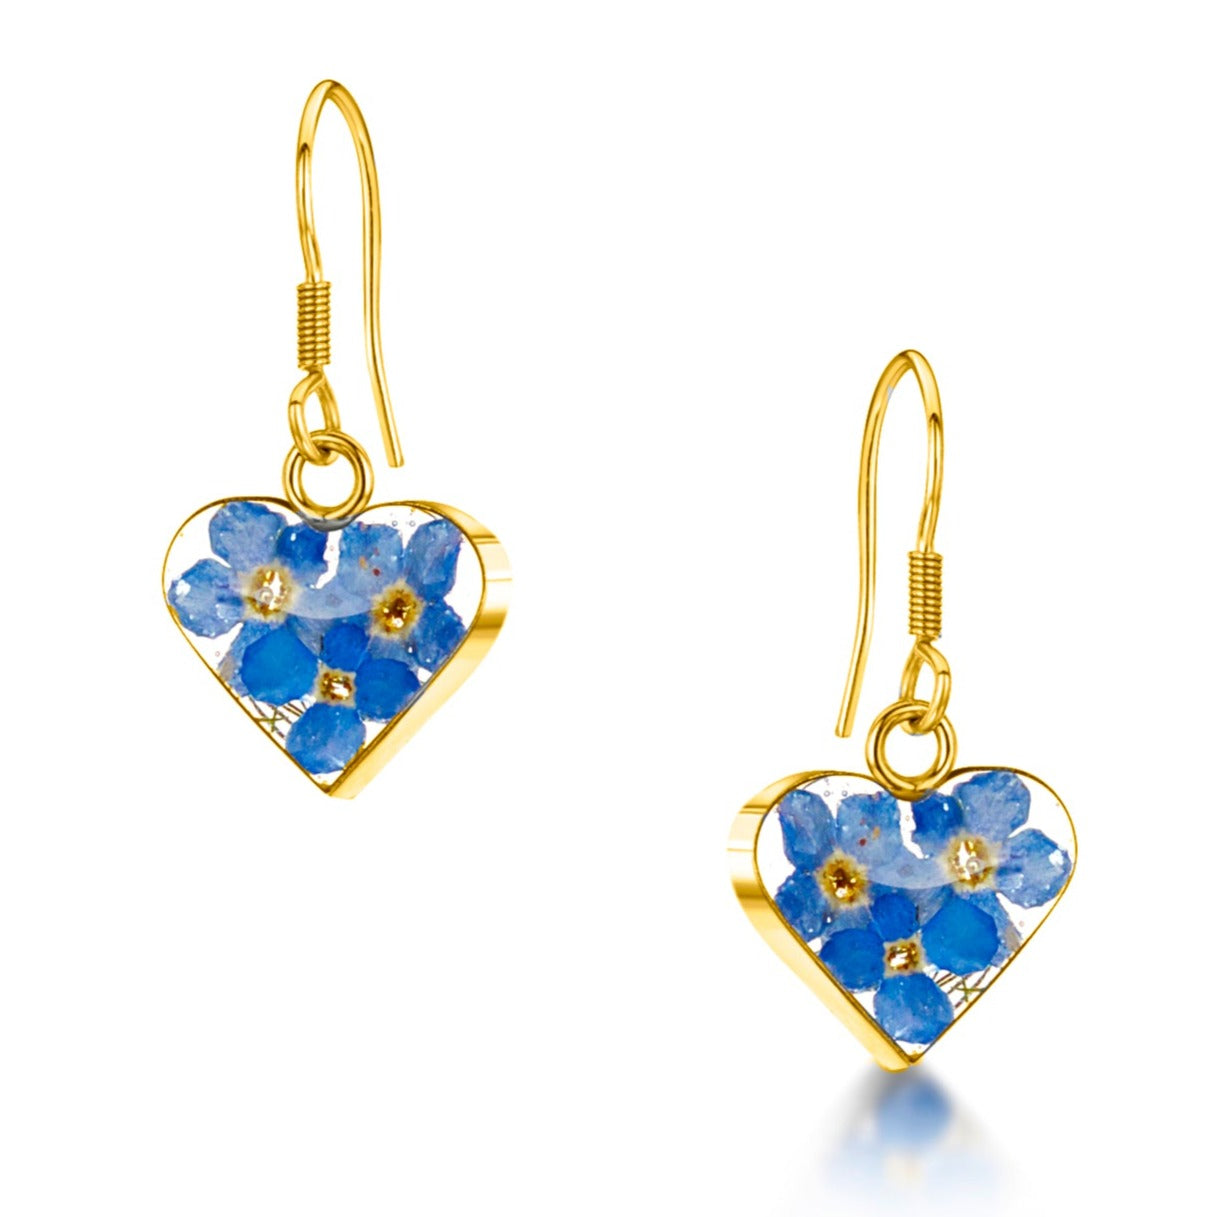 Sterling silver, gold-plated dangly drop heart earrings with real forget-me-not flowers set in resin.